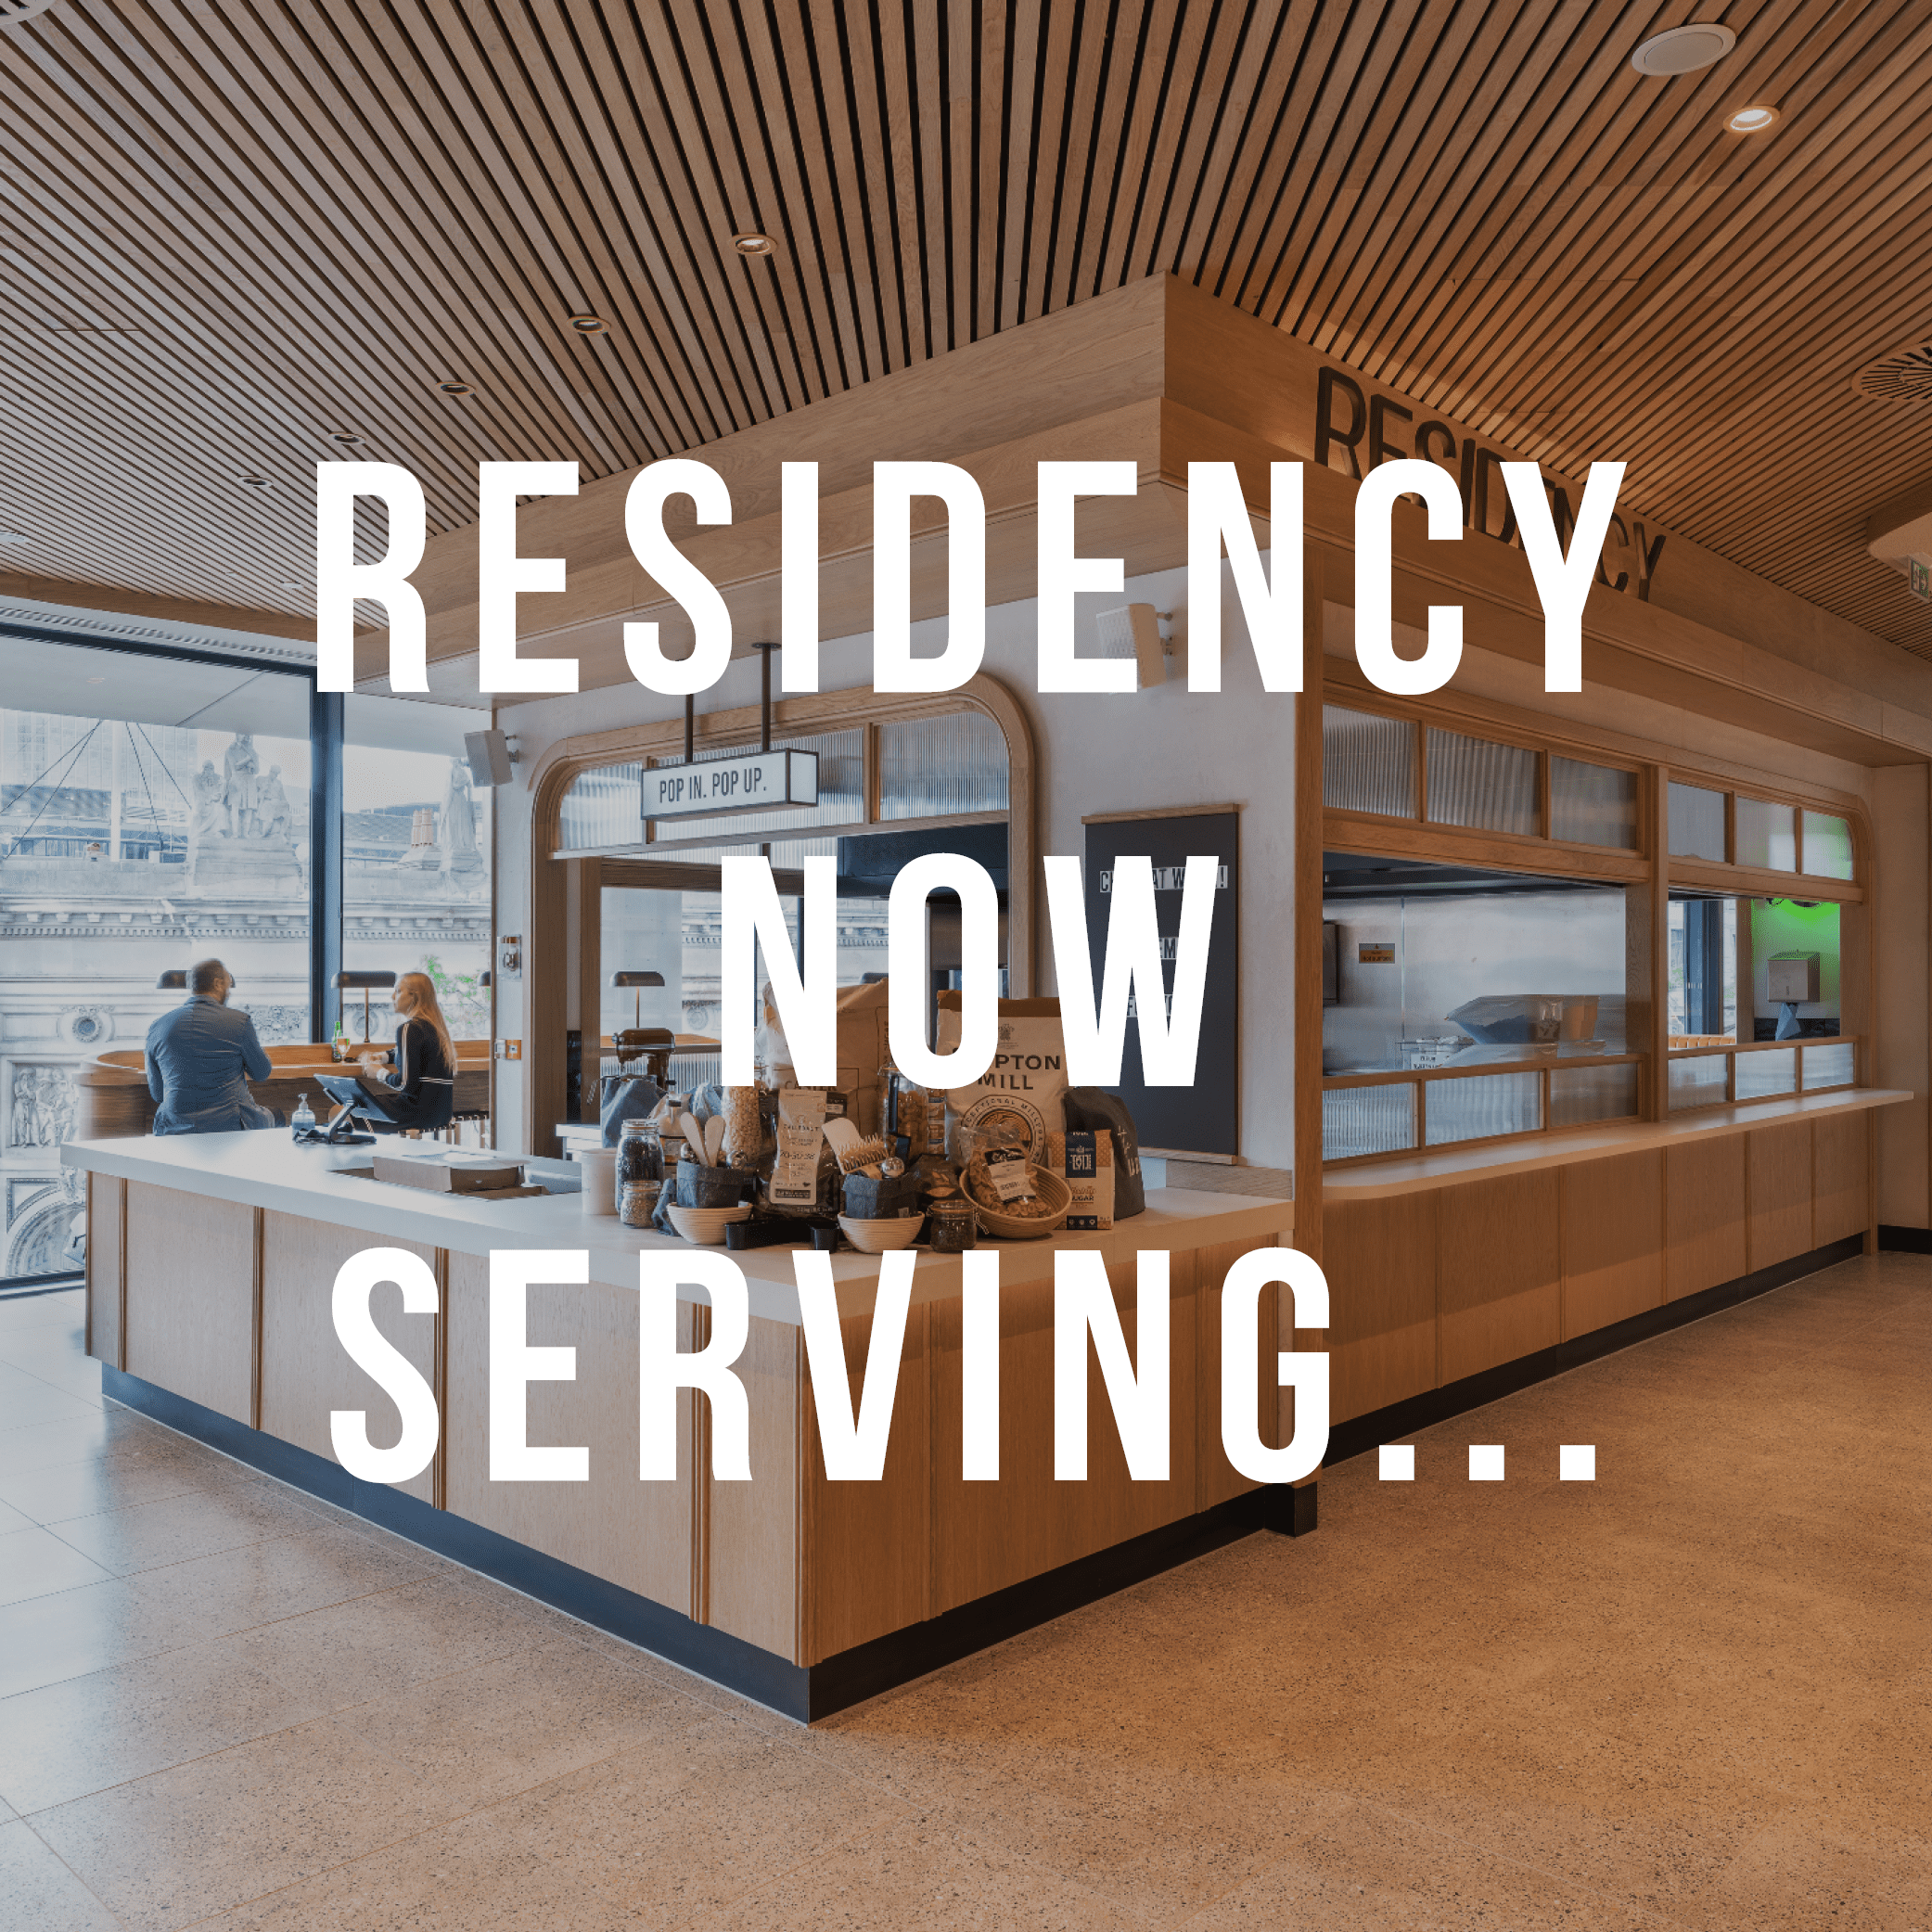 image of residency counter with text saying "residency now serving..."